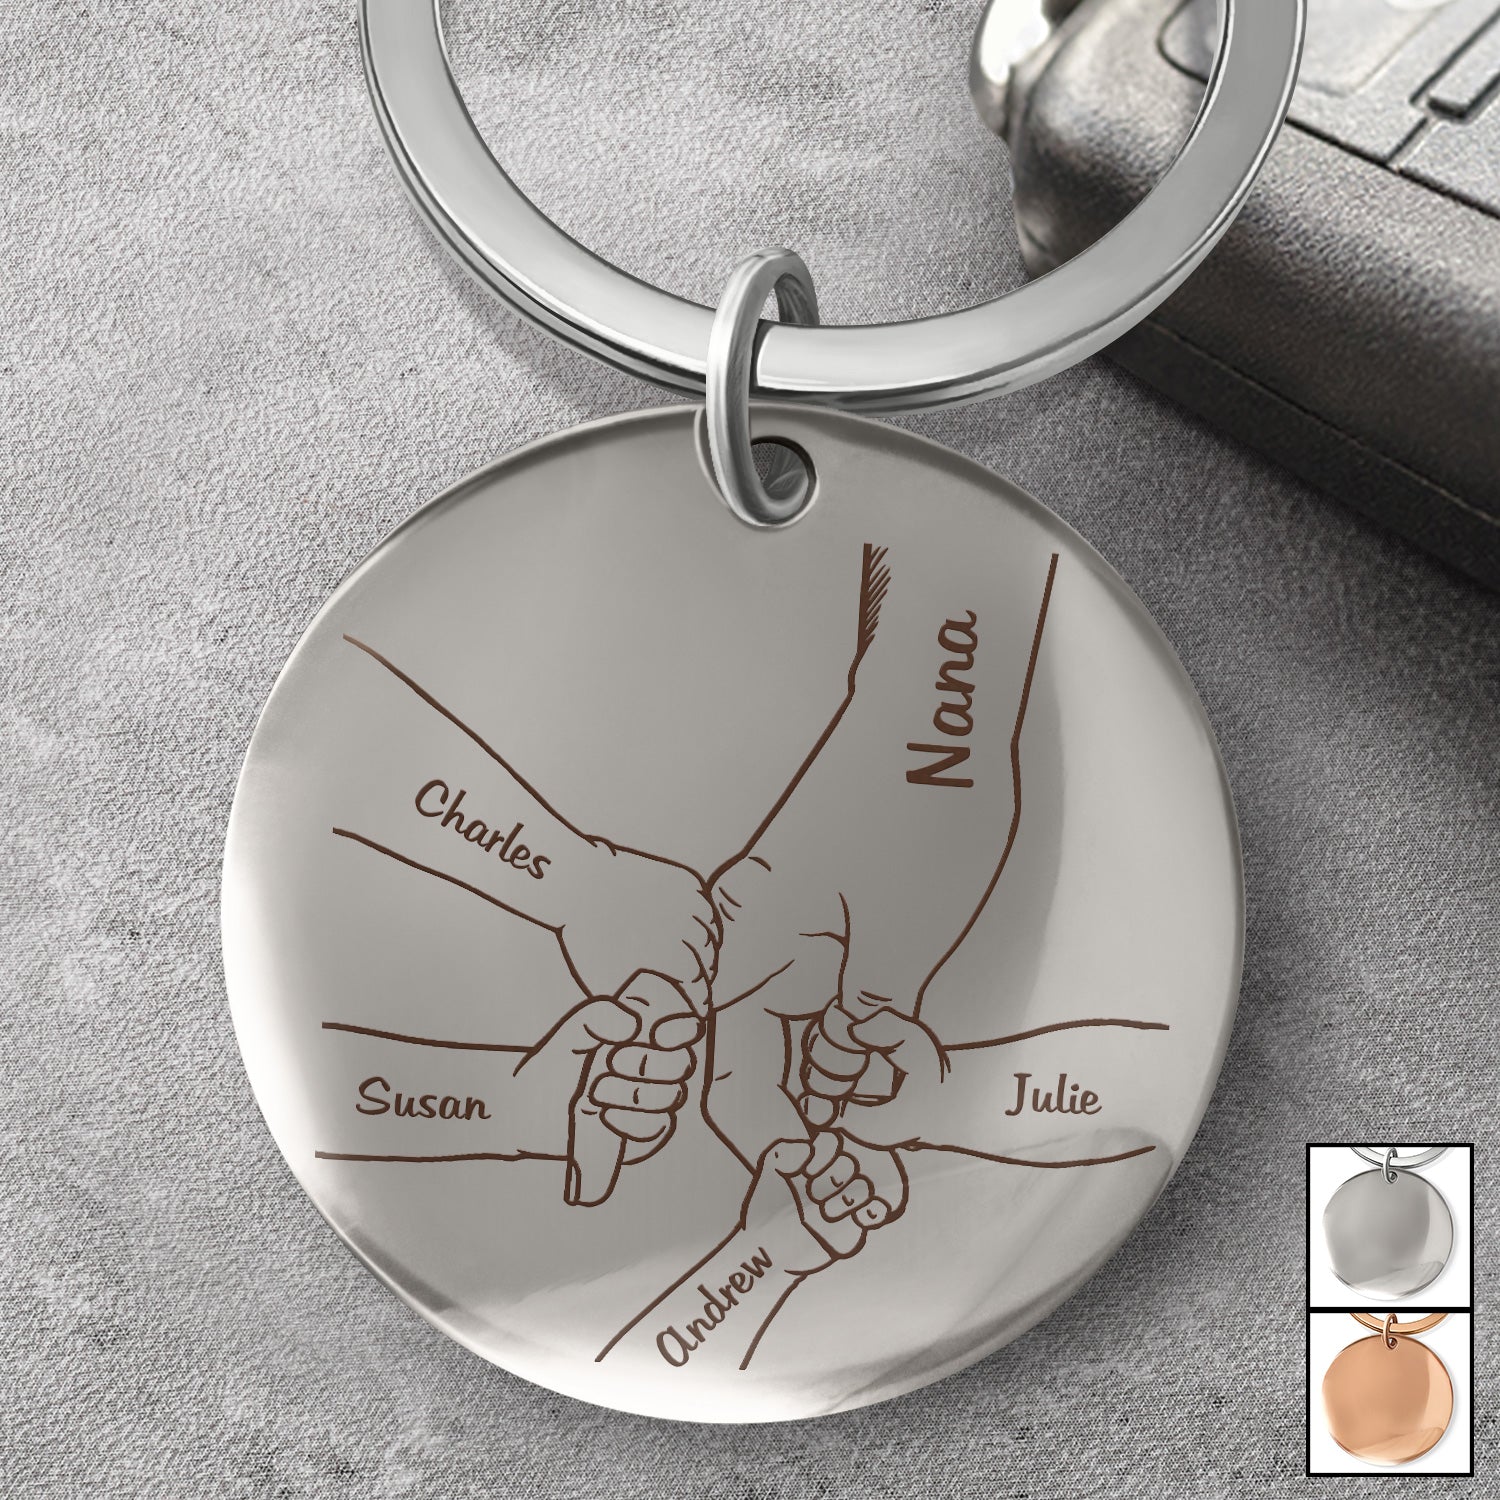 Hand In Hand, I Will Always Protect You - Gift For Mom, Grandma, Nana - Personalized Keyring